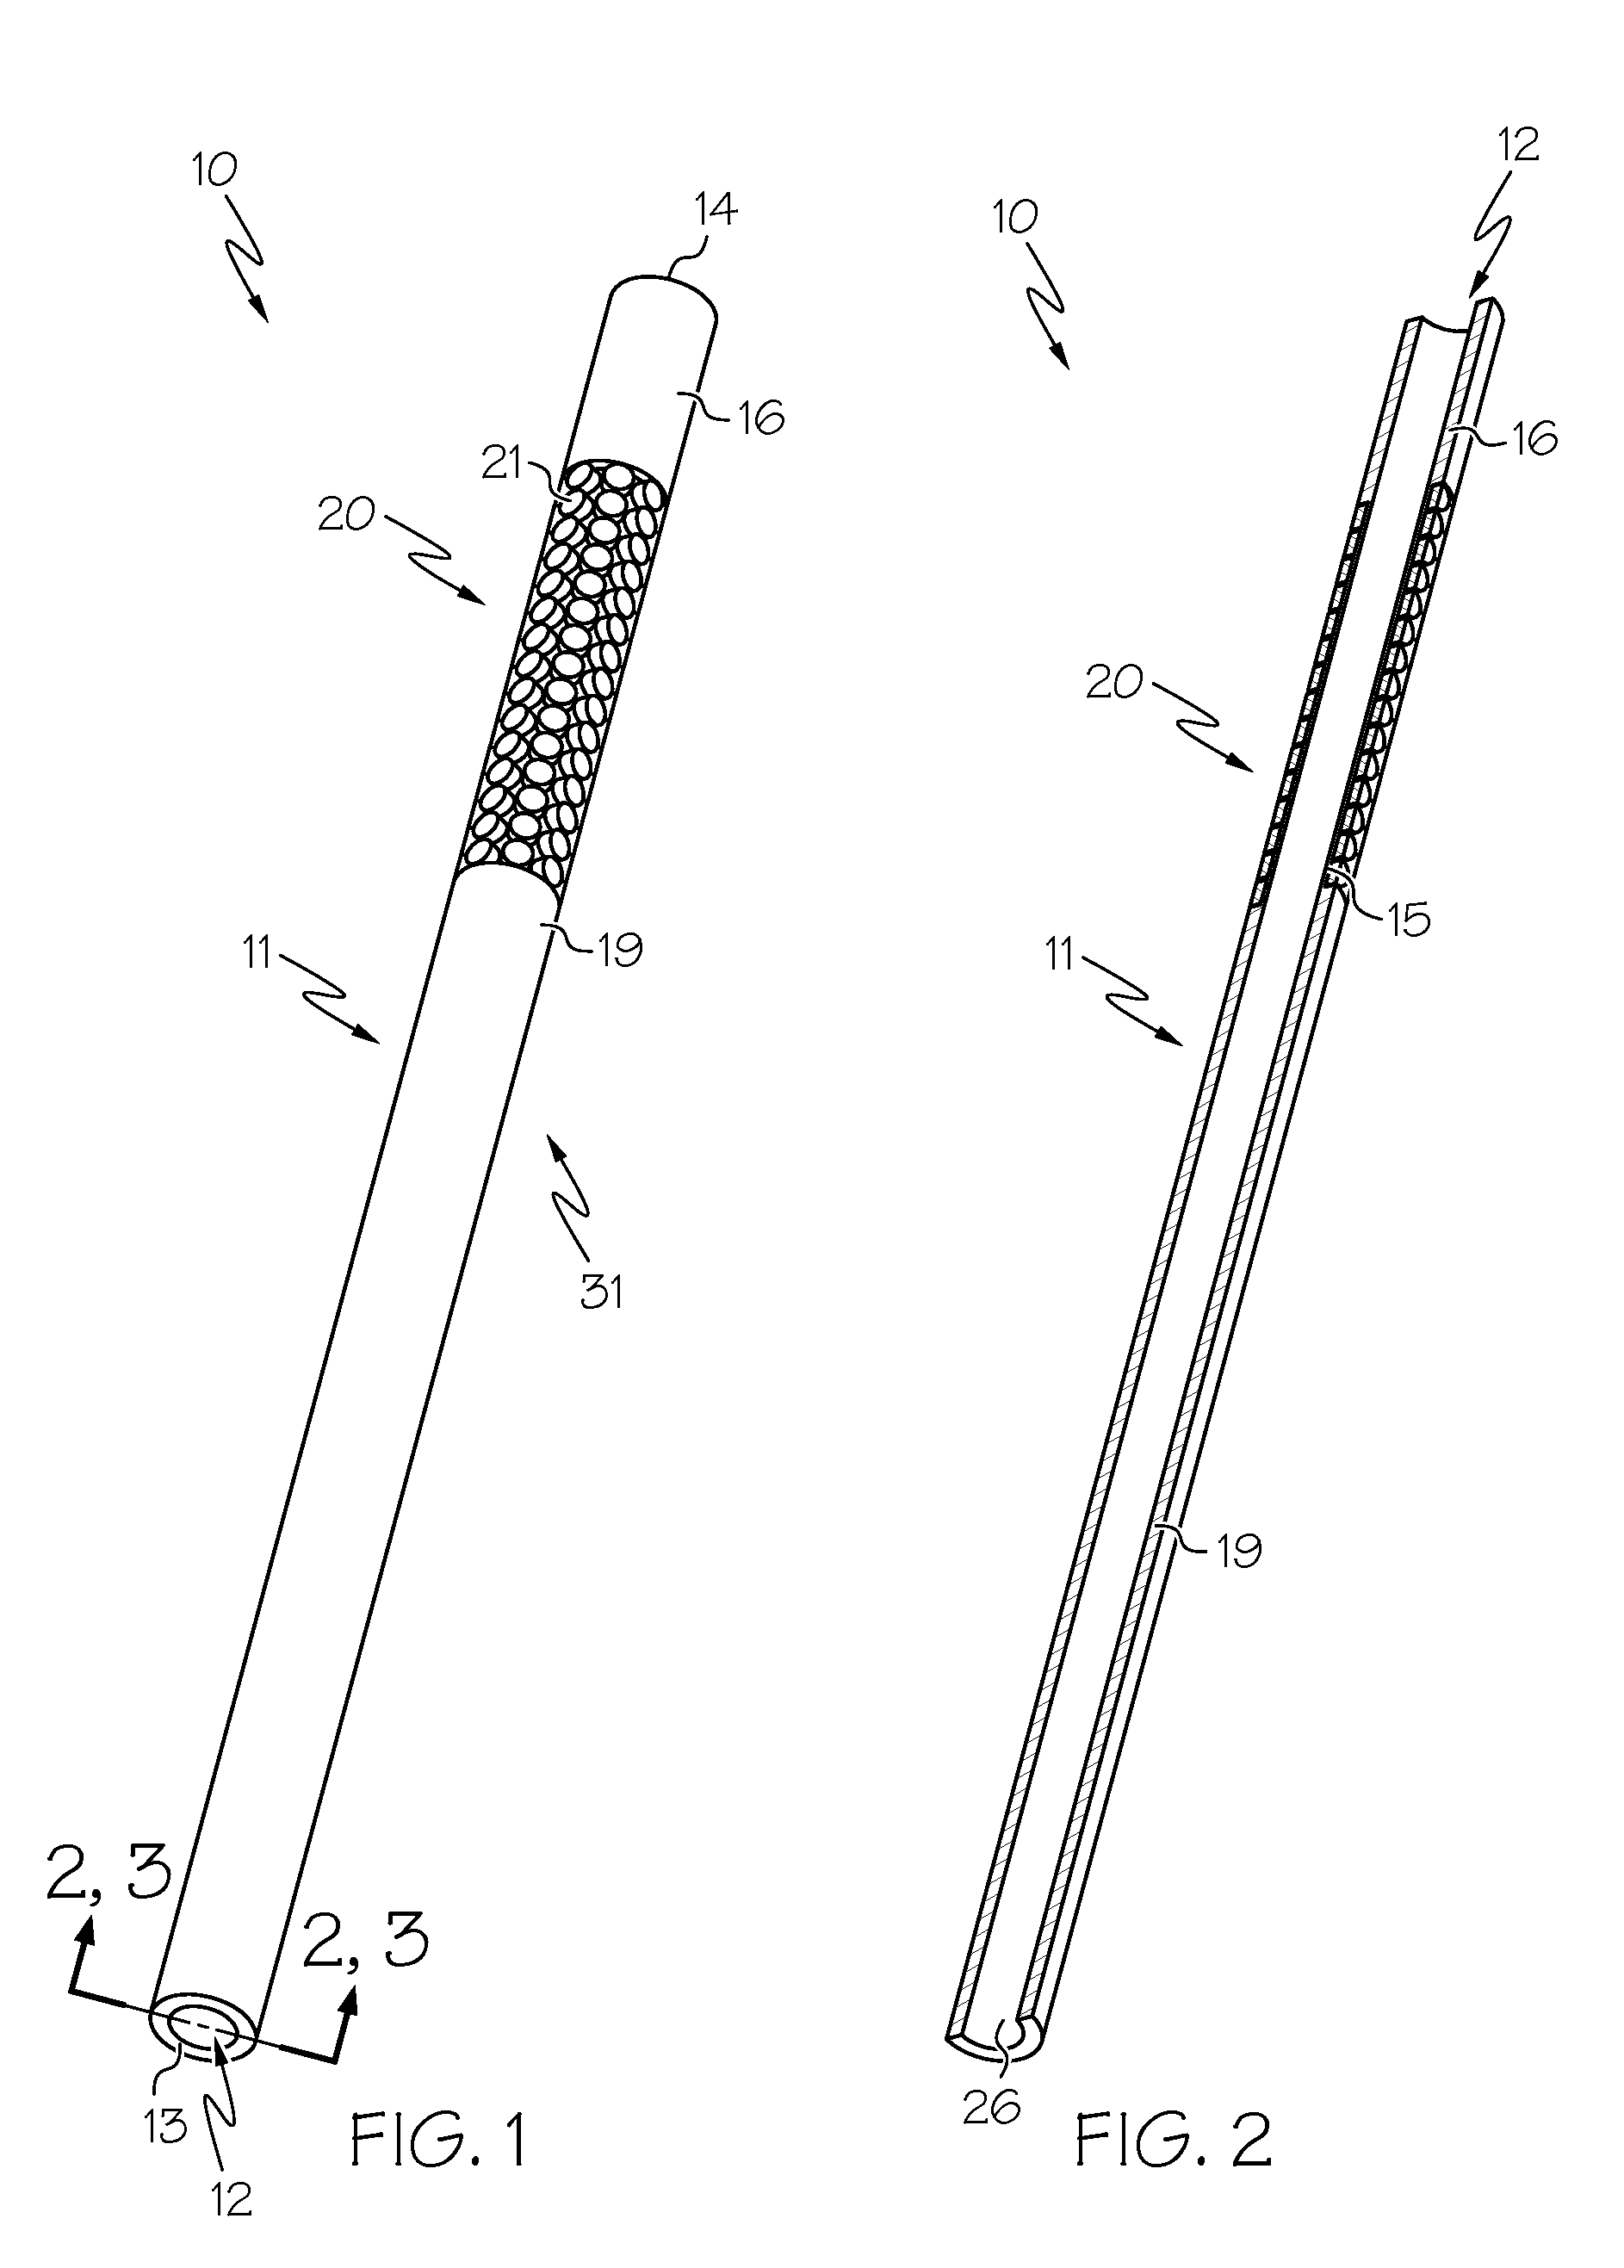 Drinking Straw and Embellishment System